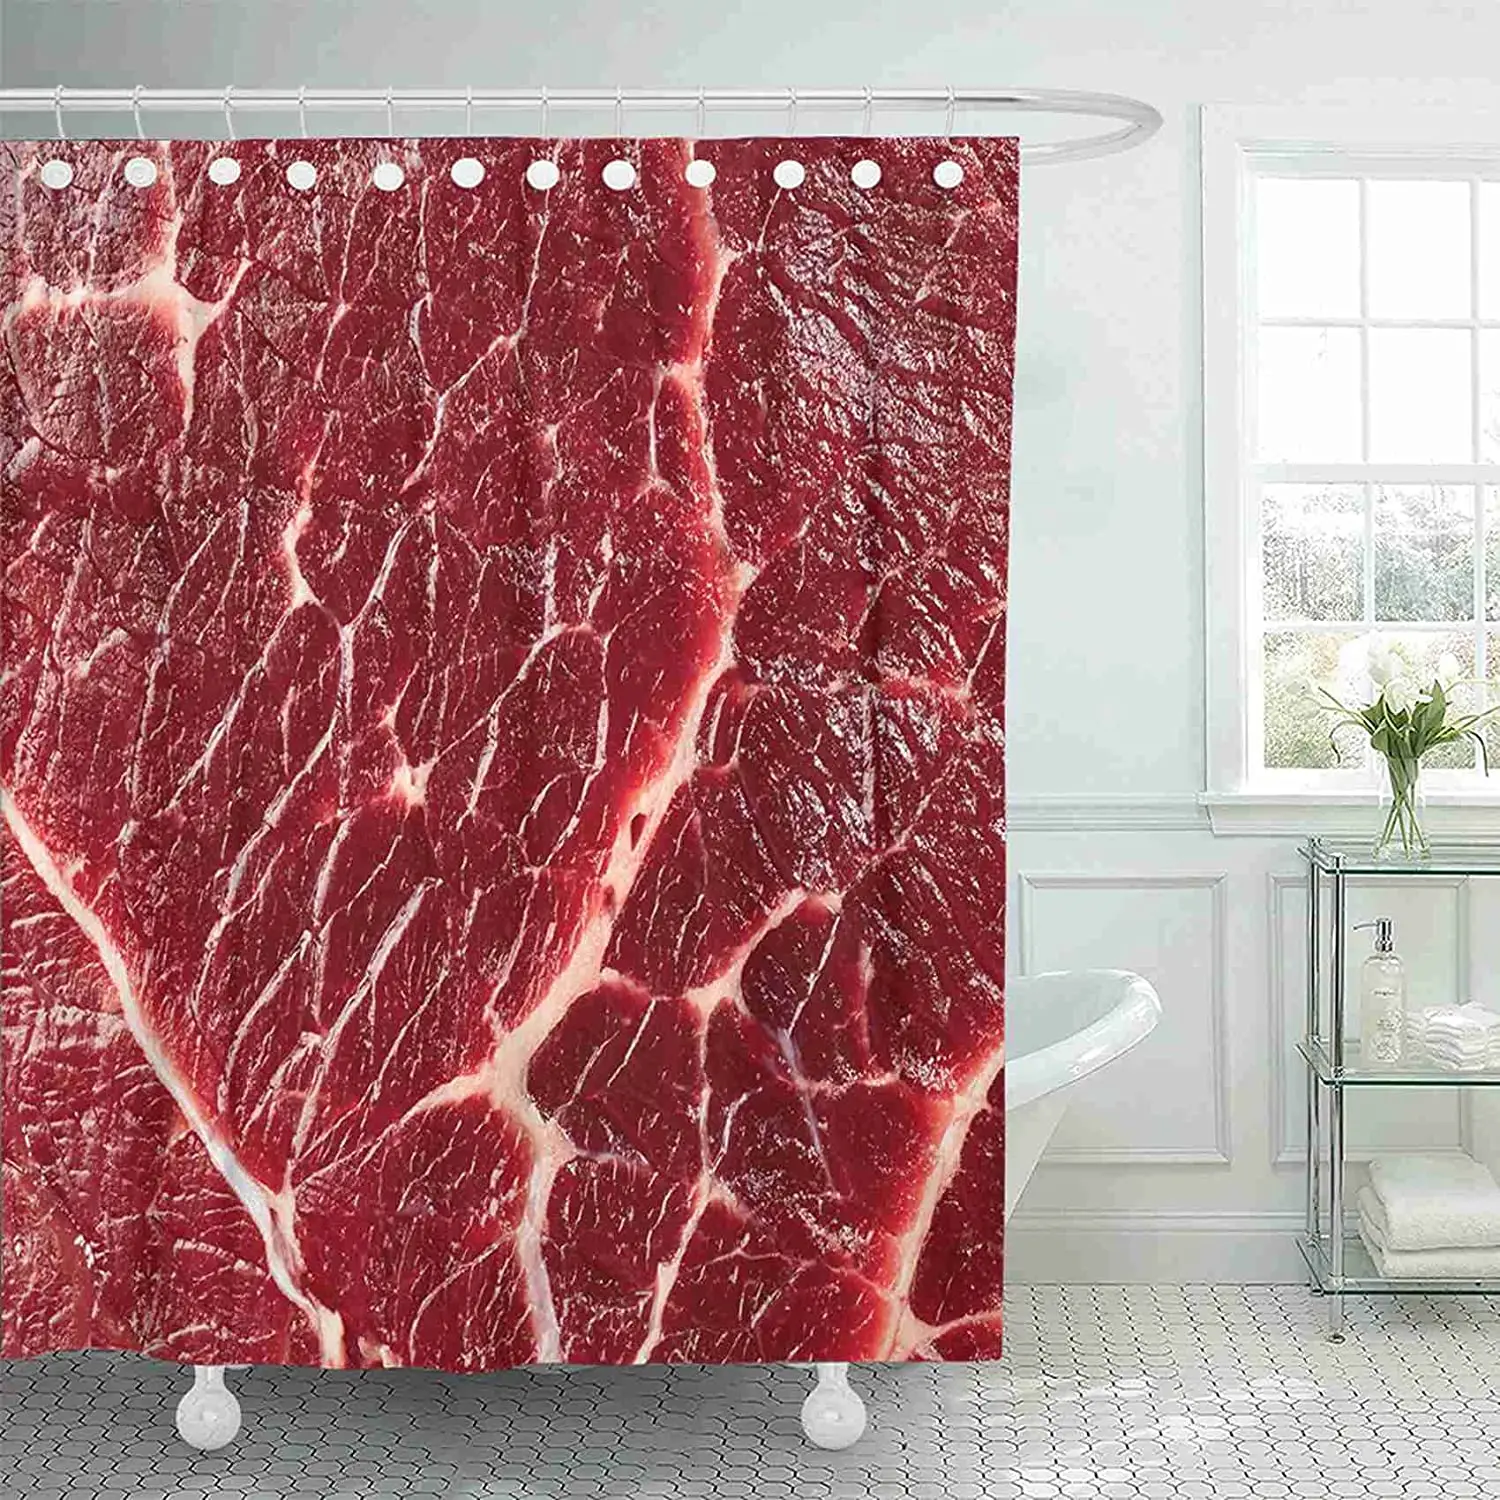 april whiteman recommends what does beef curtains mean pic